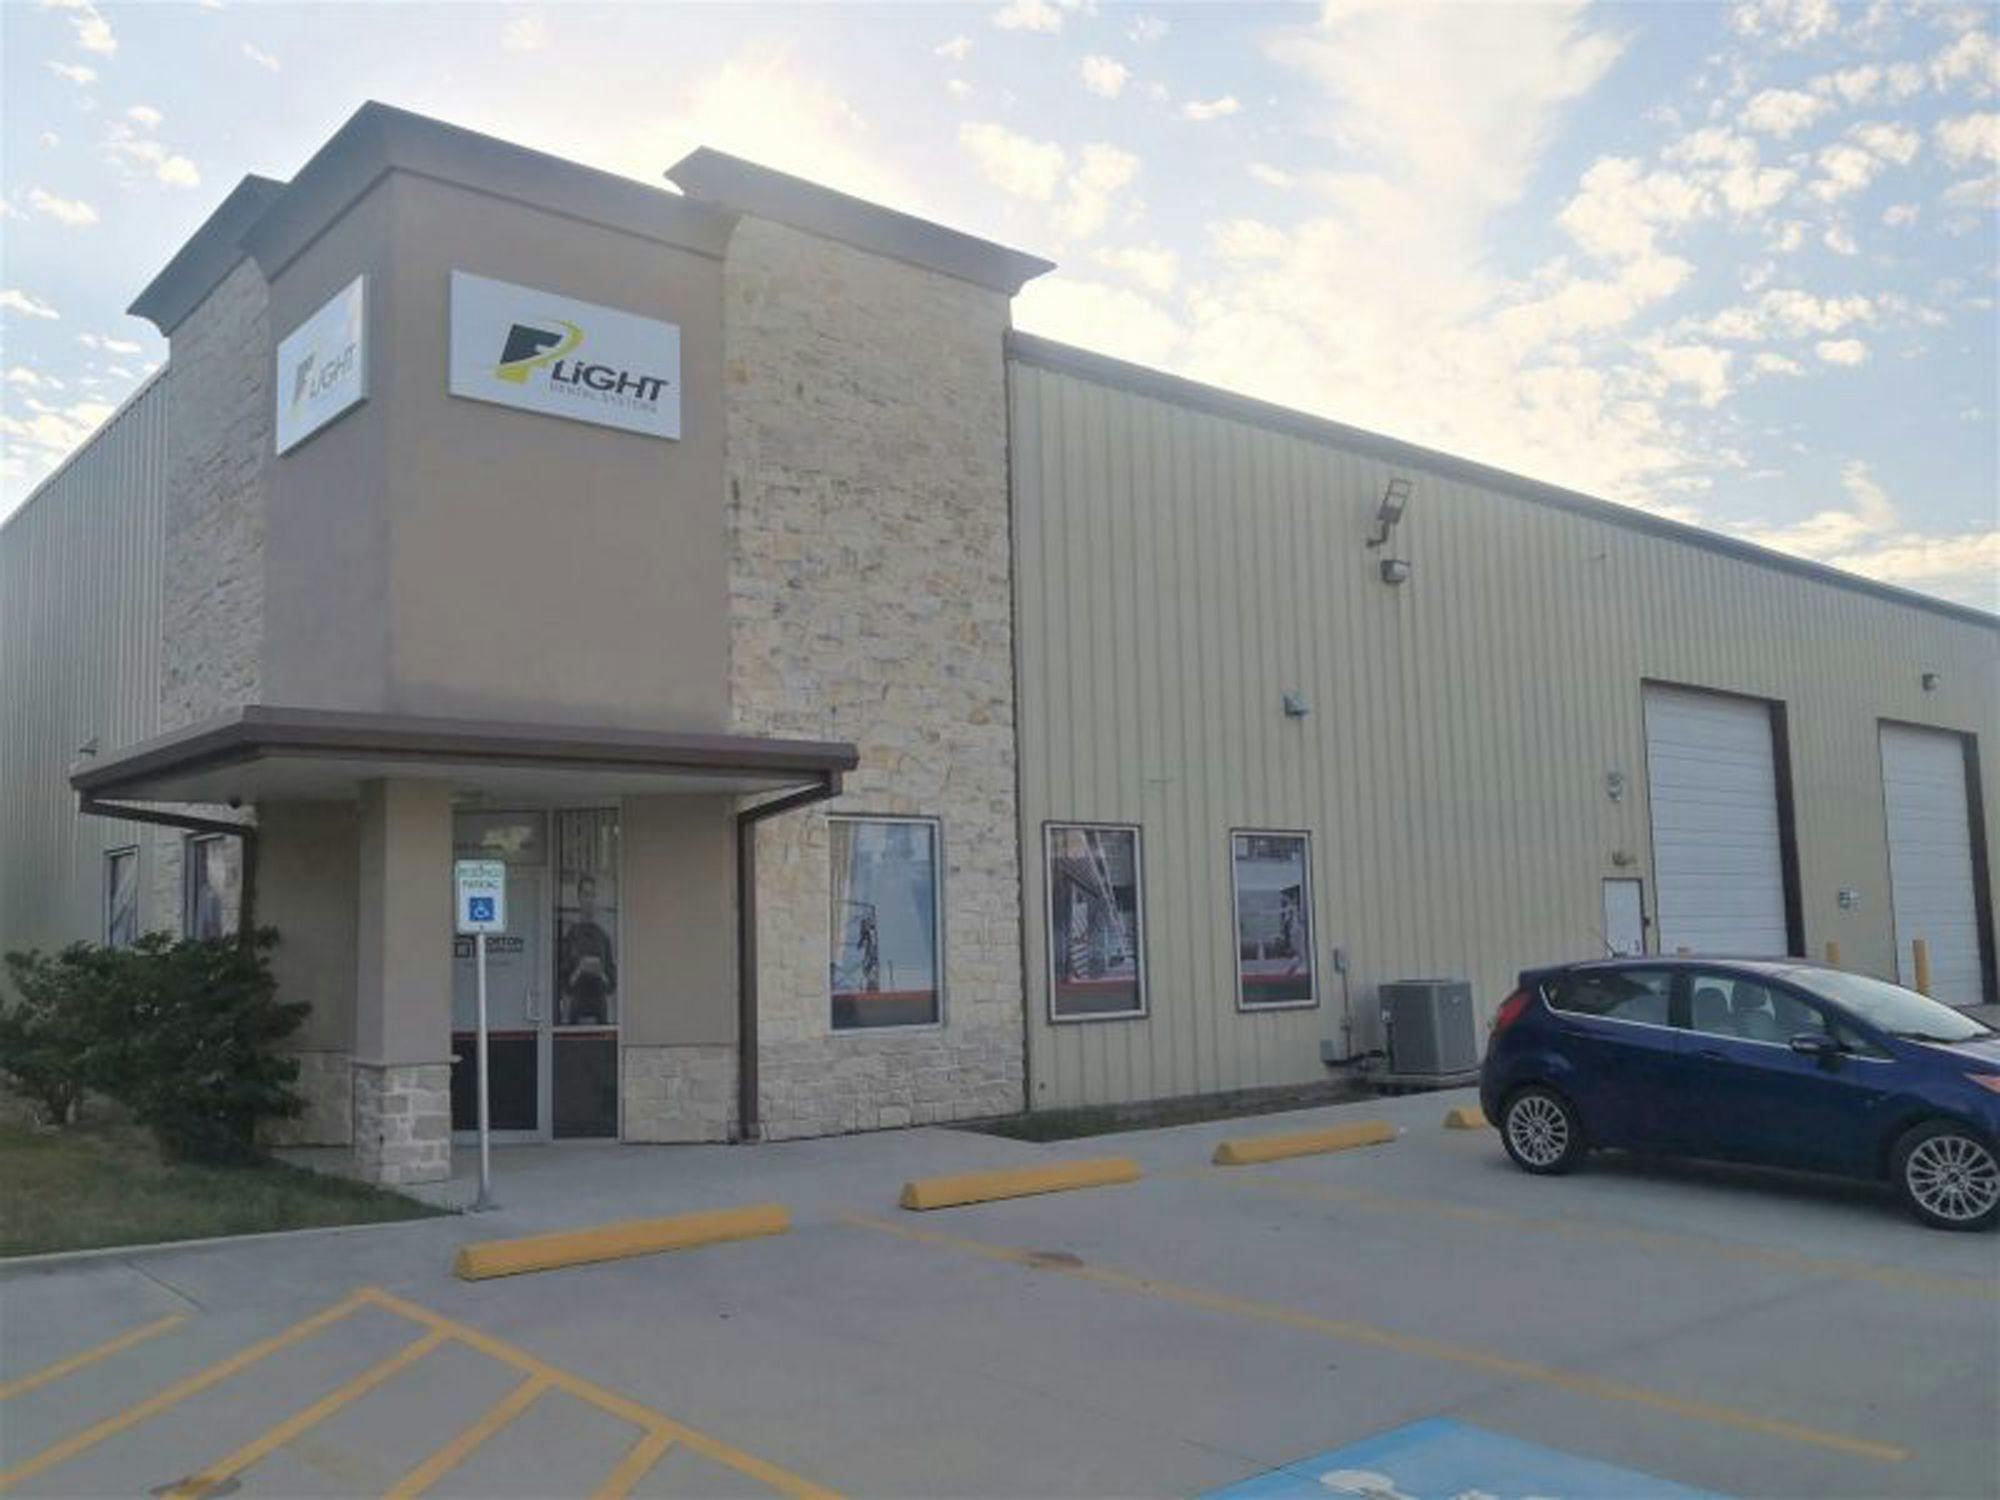 Flight Dental Systems Opens New Manufacturing Facility in Houston, Texas